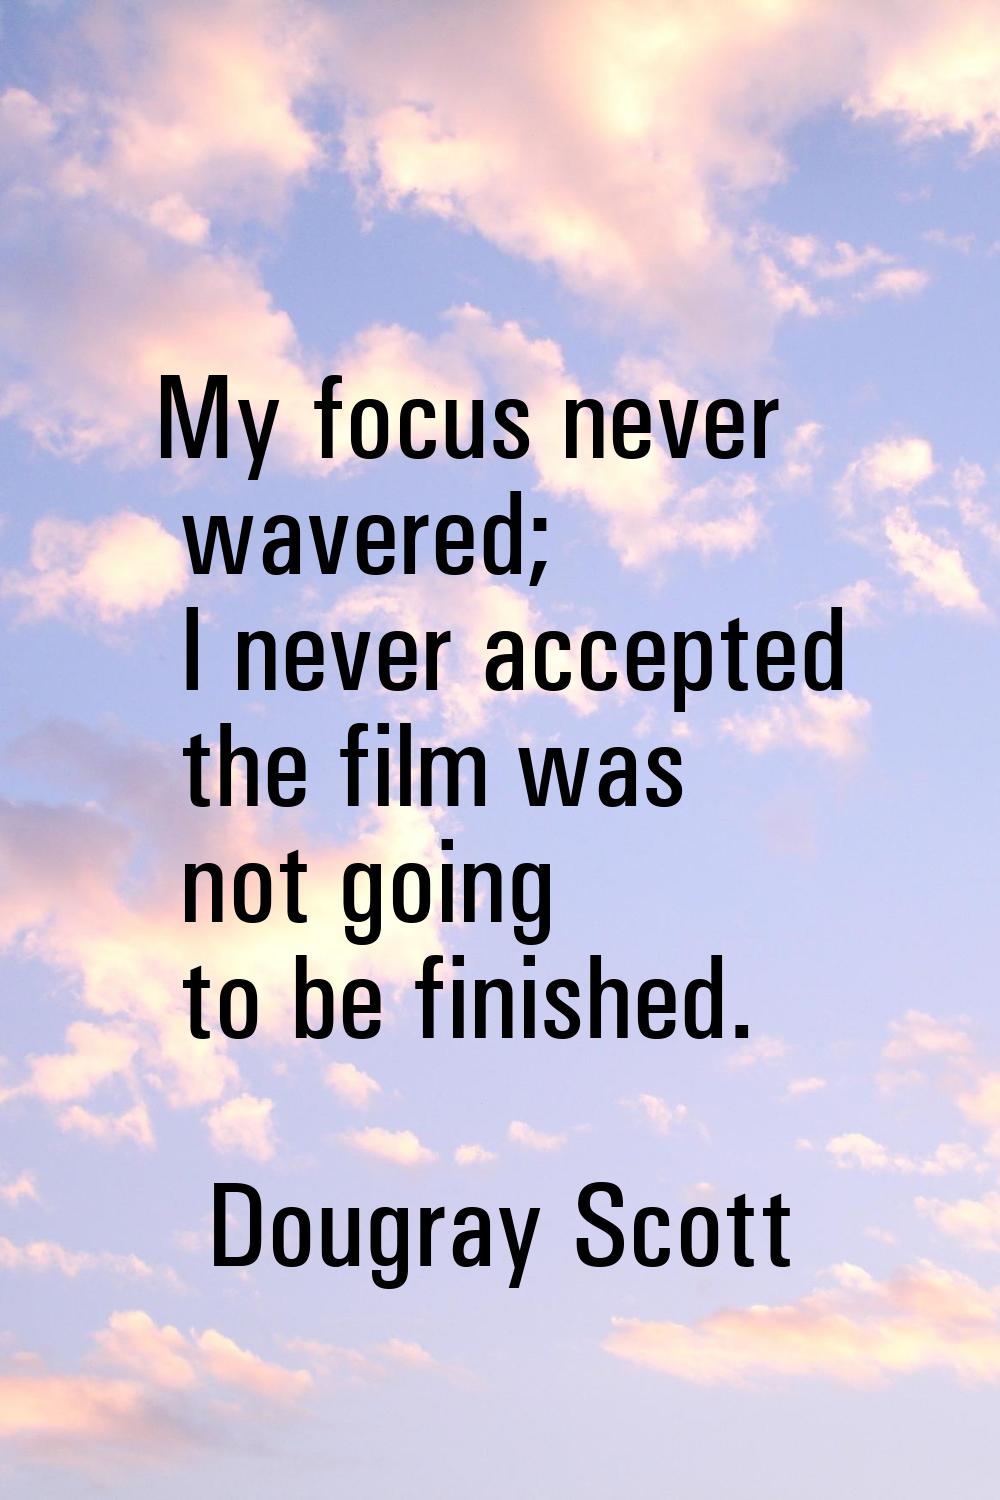 My focus never wavered; I never accepted the film was not going to be finished.